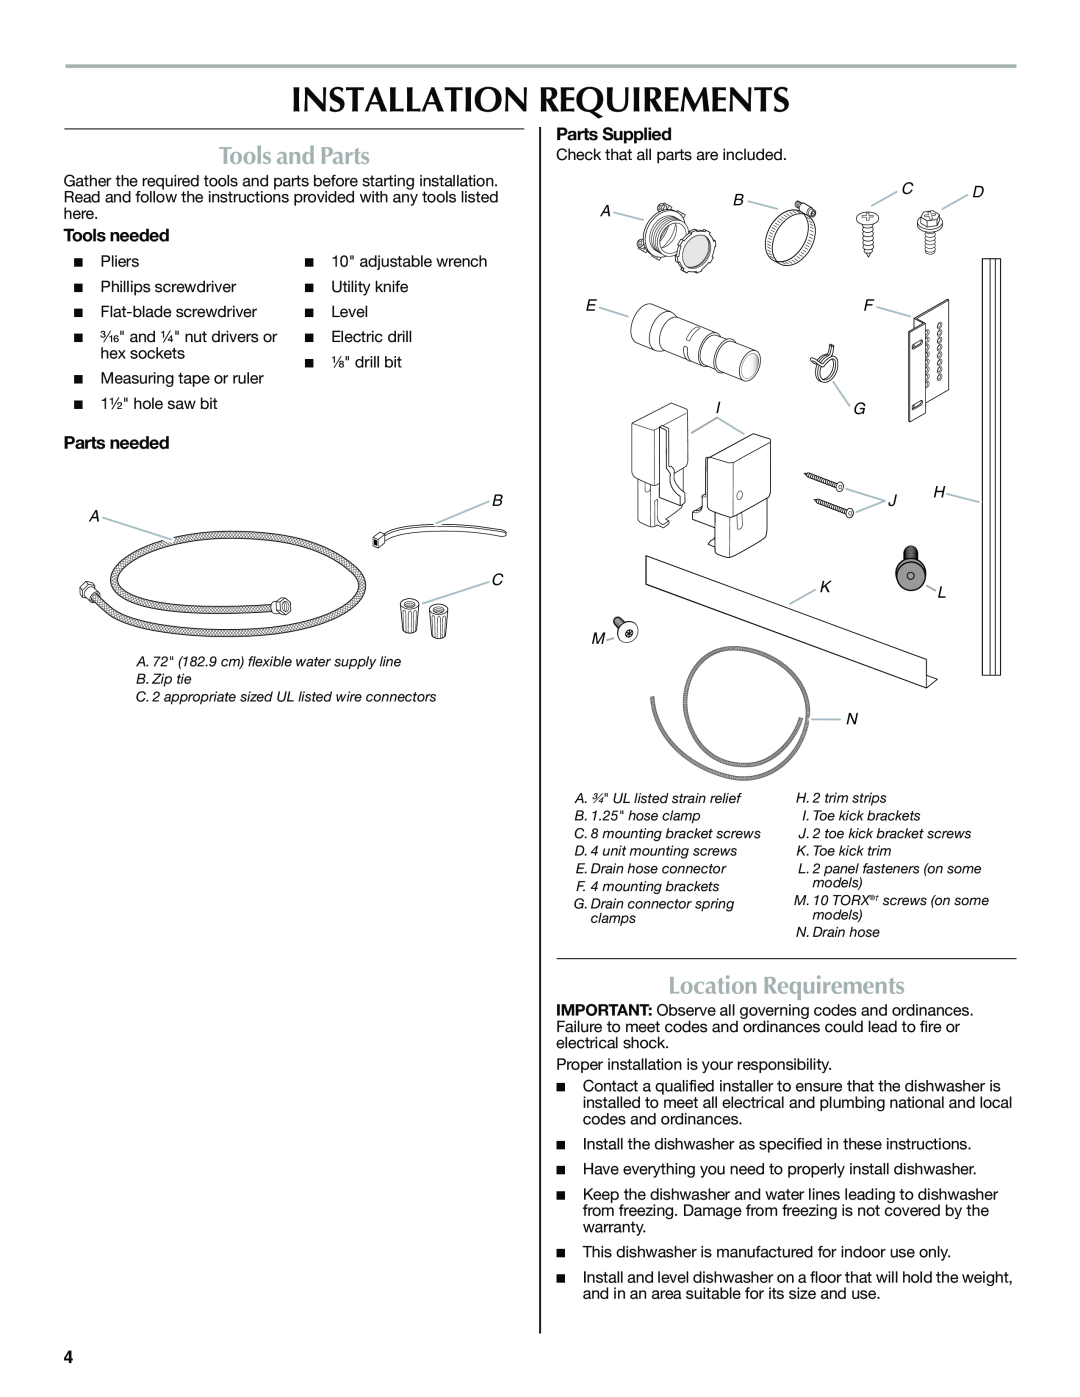 Maytag W10300218A Installation Requirements, Tools and Parts, Location Requirements, Bc D, B A C, Ef Ig J H K L M N 